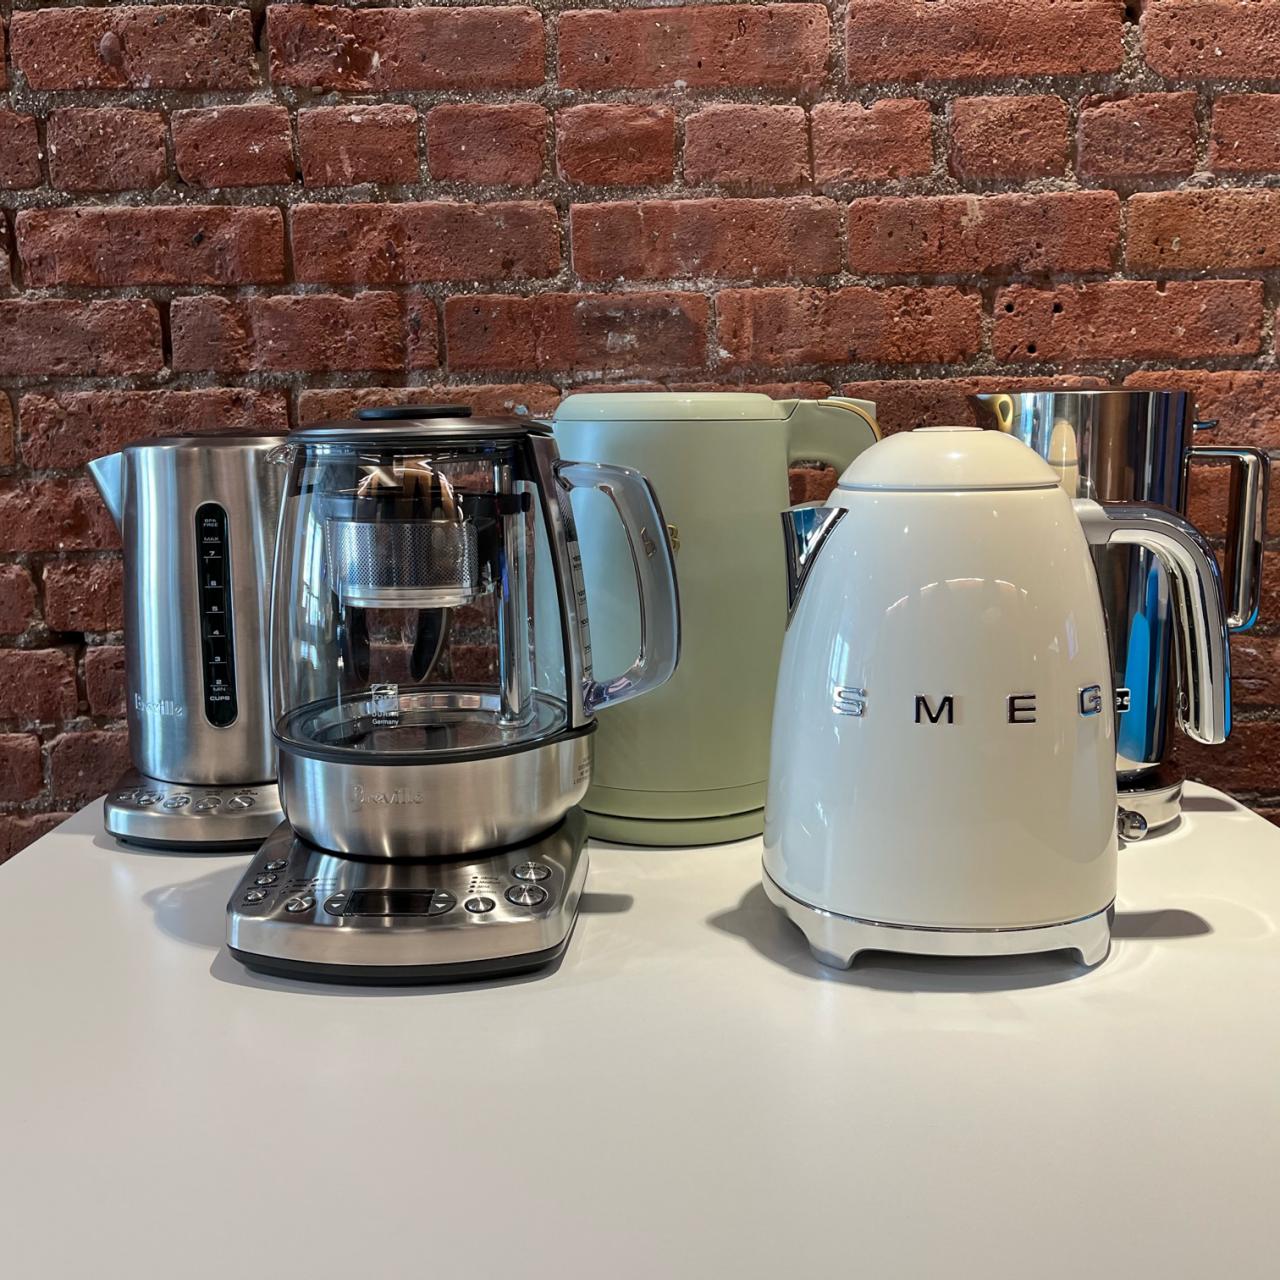 Kettles: 5 Ways to Use This Popular Small Appliance